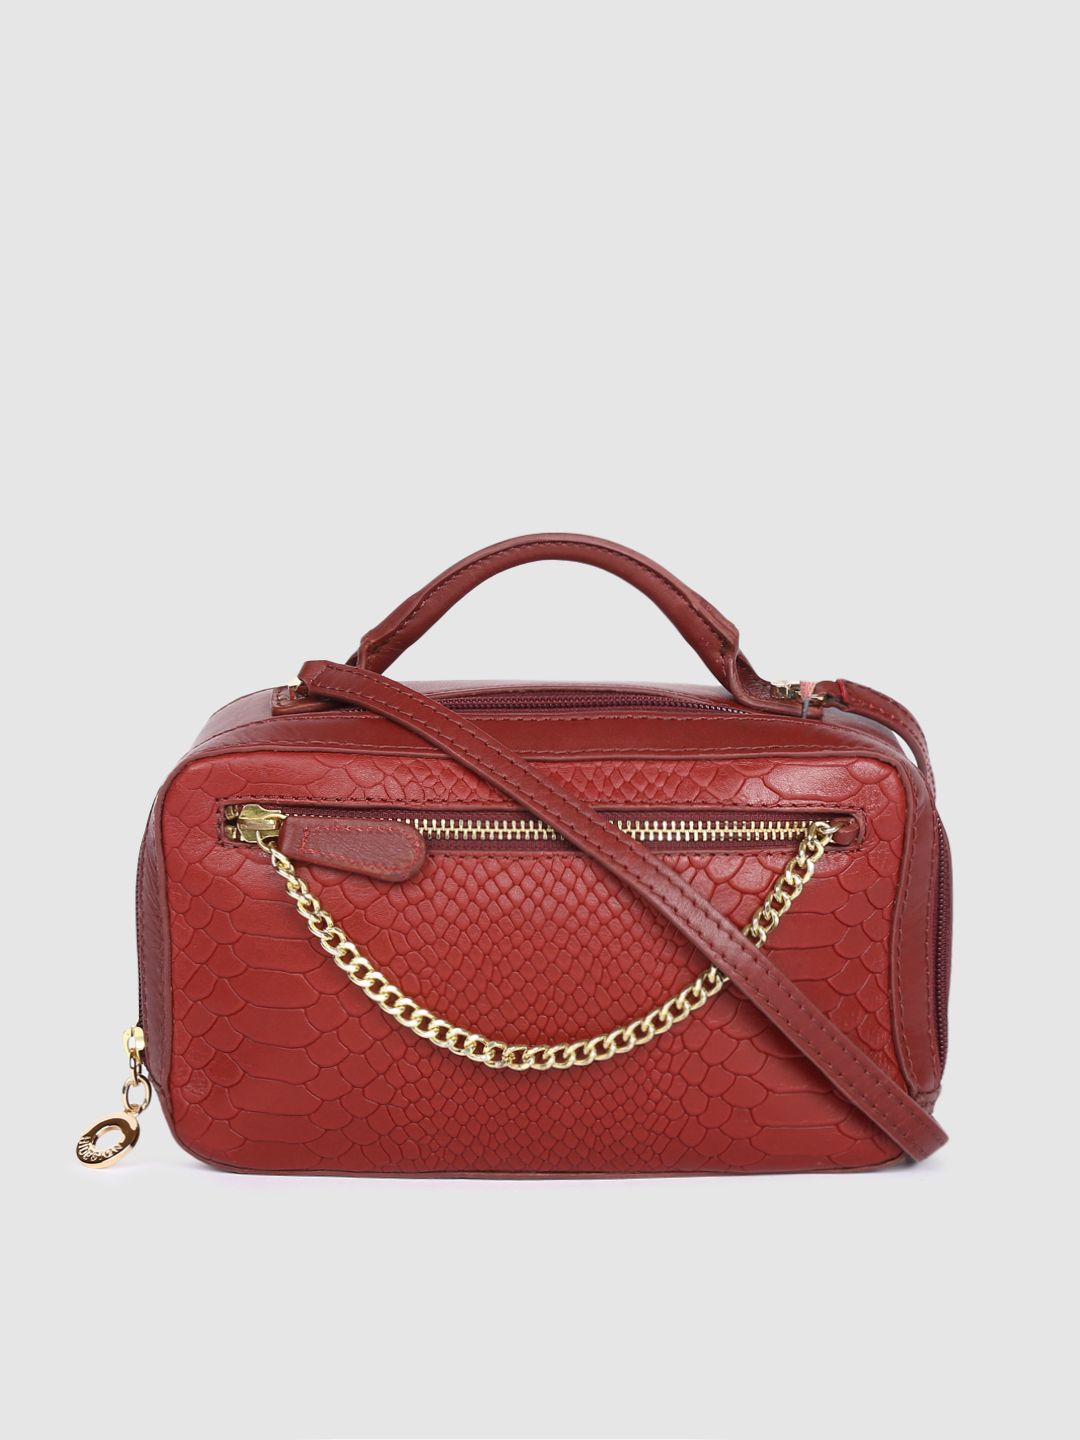 Hidesign Red Textured Leather Handheld Bag Price in India